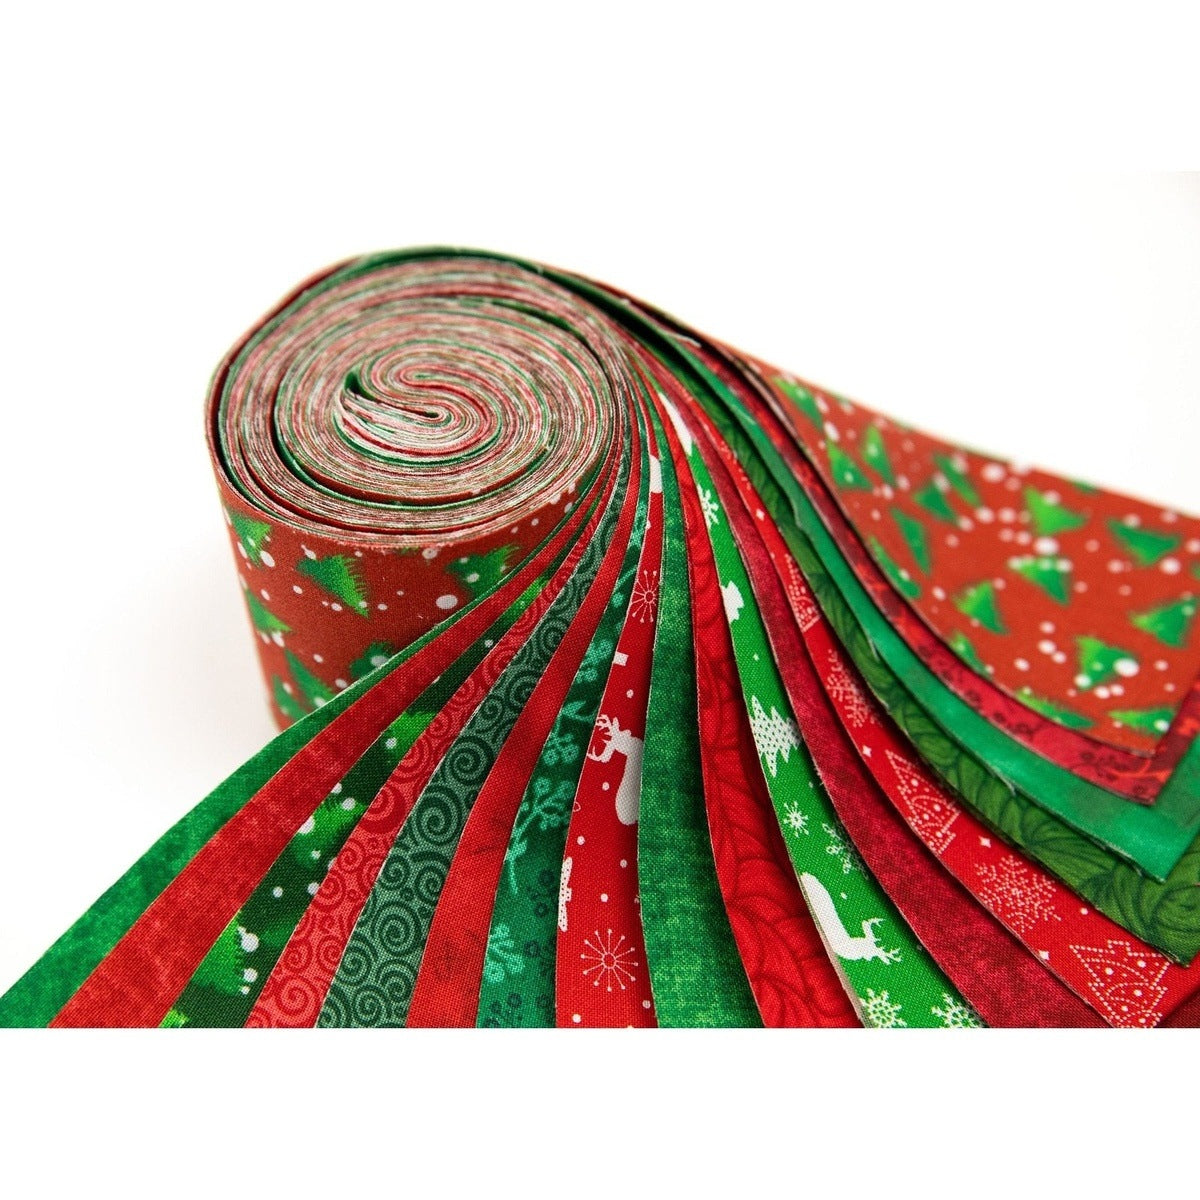 2.5 inch Christmas Basics Red and Green Blenders Strip Roll 100% cotton fabric quilting strips 17 strips